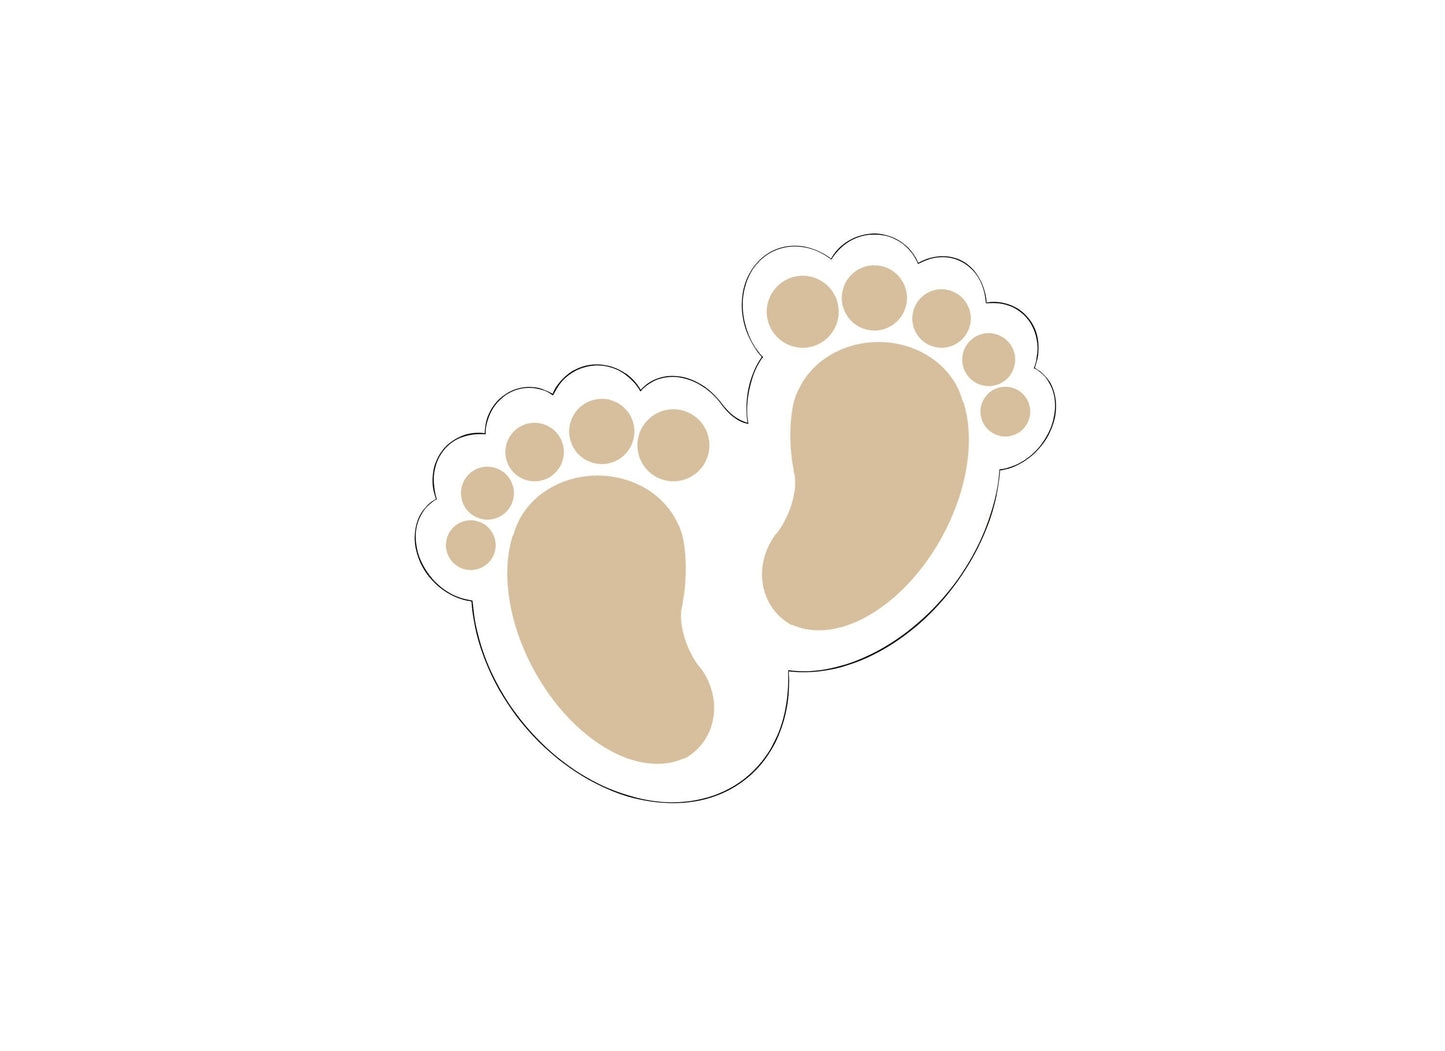 baby feet outline left and right